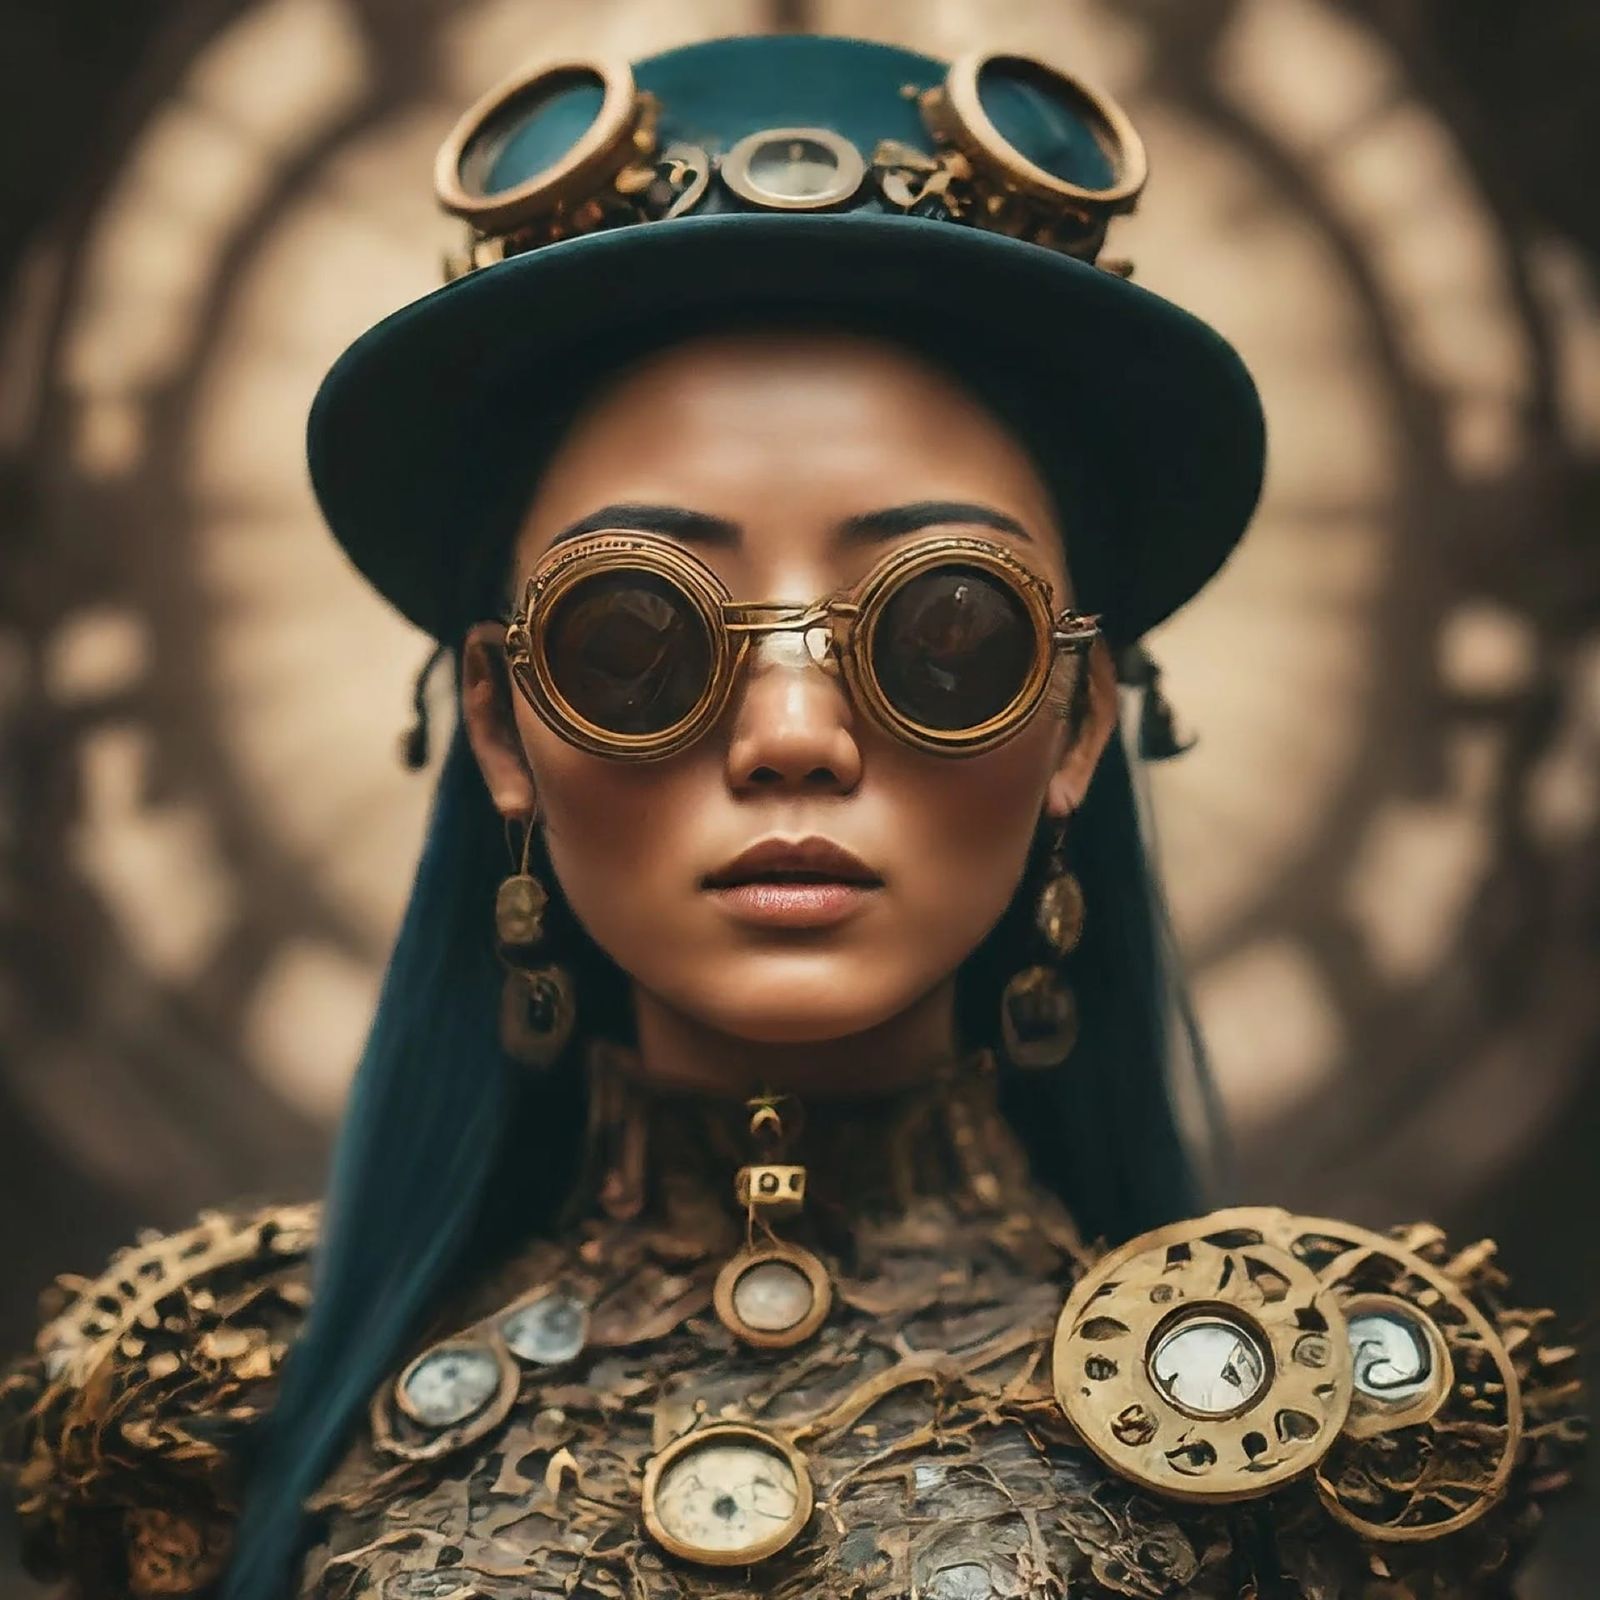 Imagen generada con Google Bard y el prompt: “Generate an image of a fashion show in steampunk style digital art. Zoom in on their face.”